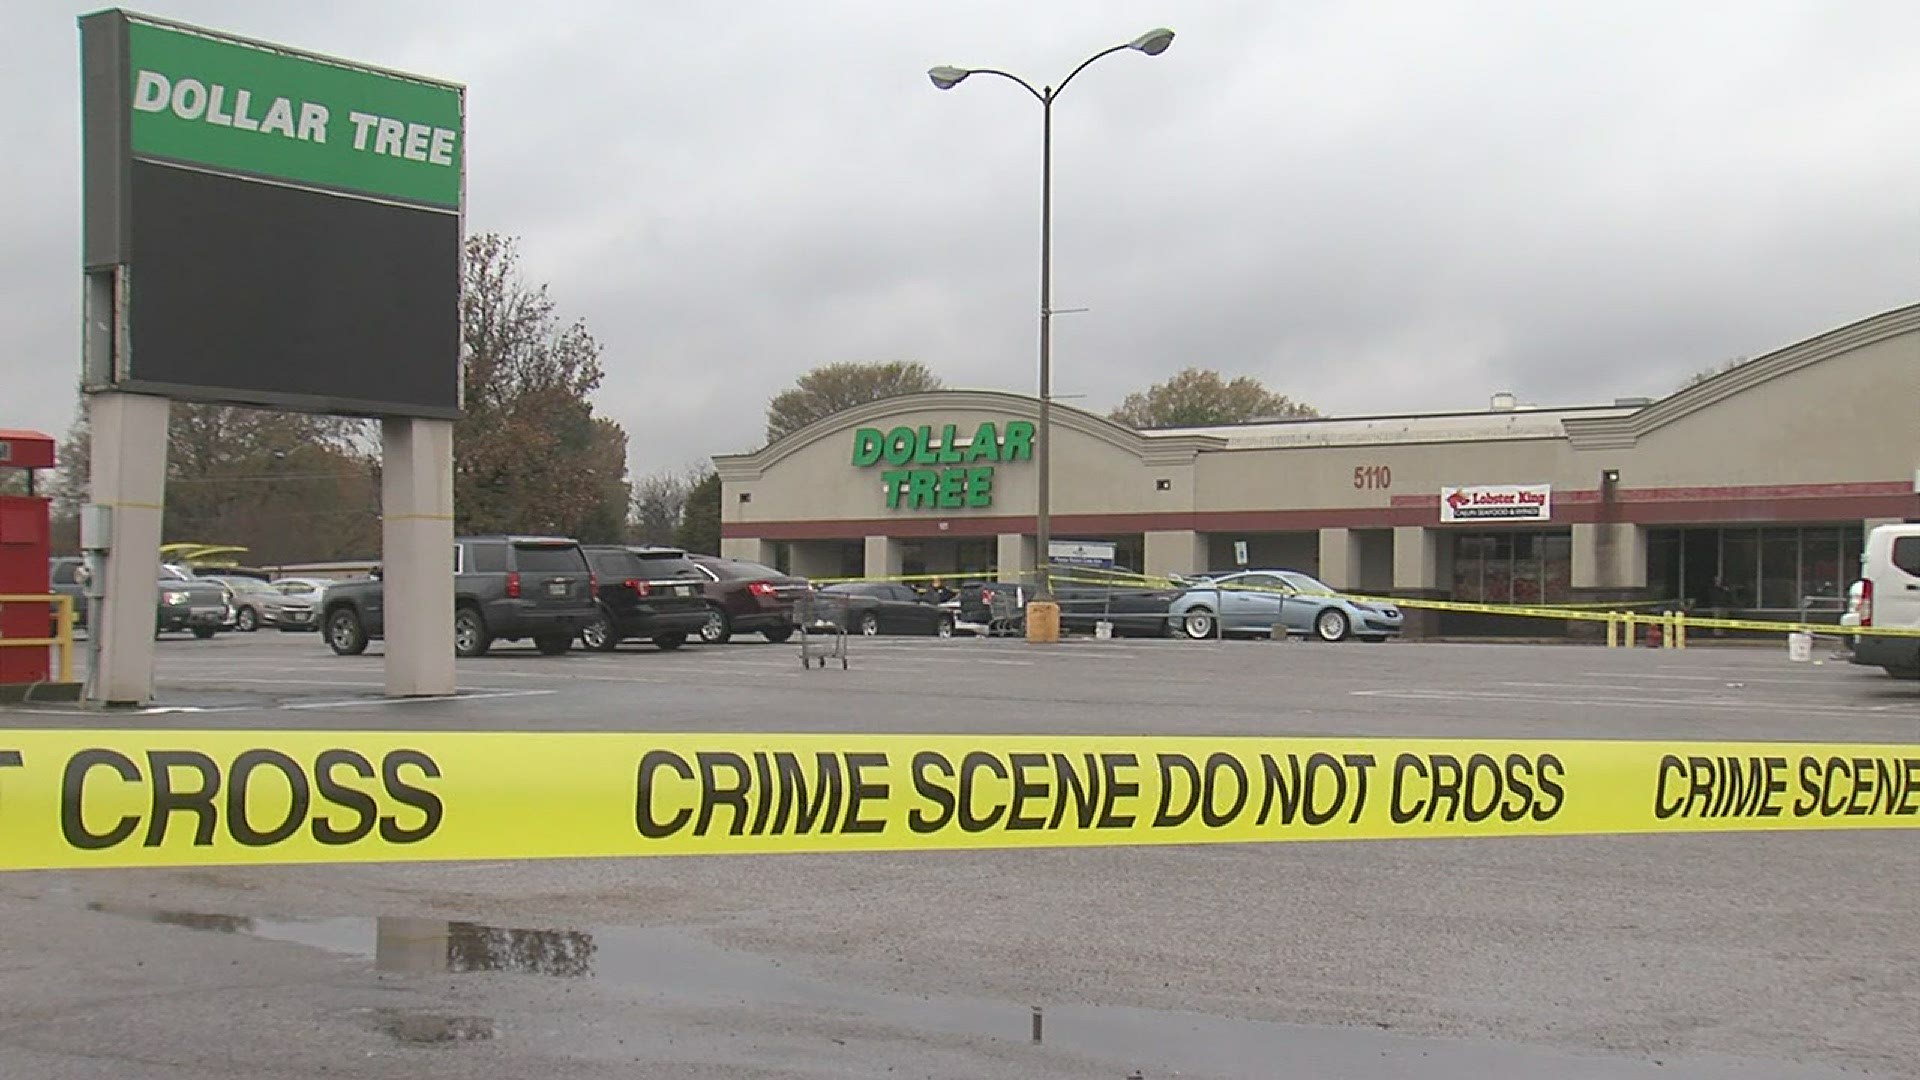 It happened about 1:00 p.m. Thursday near the Dollar Tree in the 5100 block of Summer Avenue.